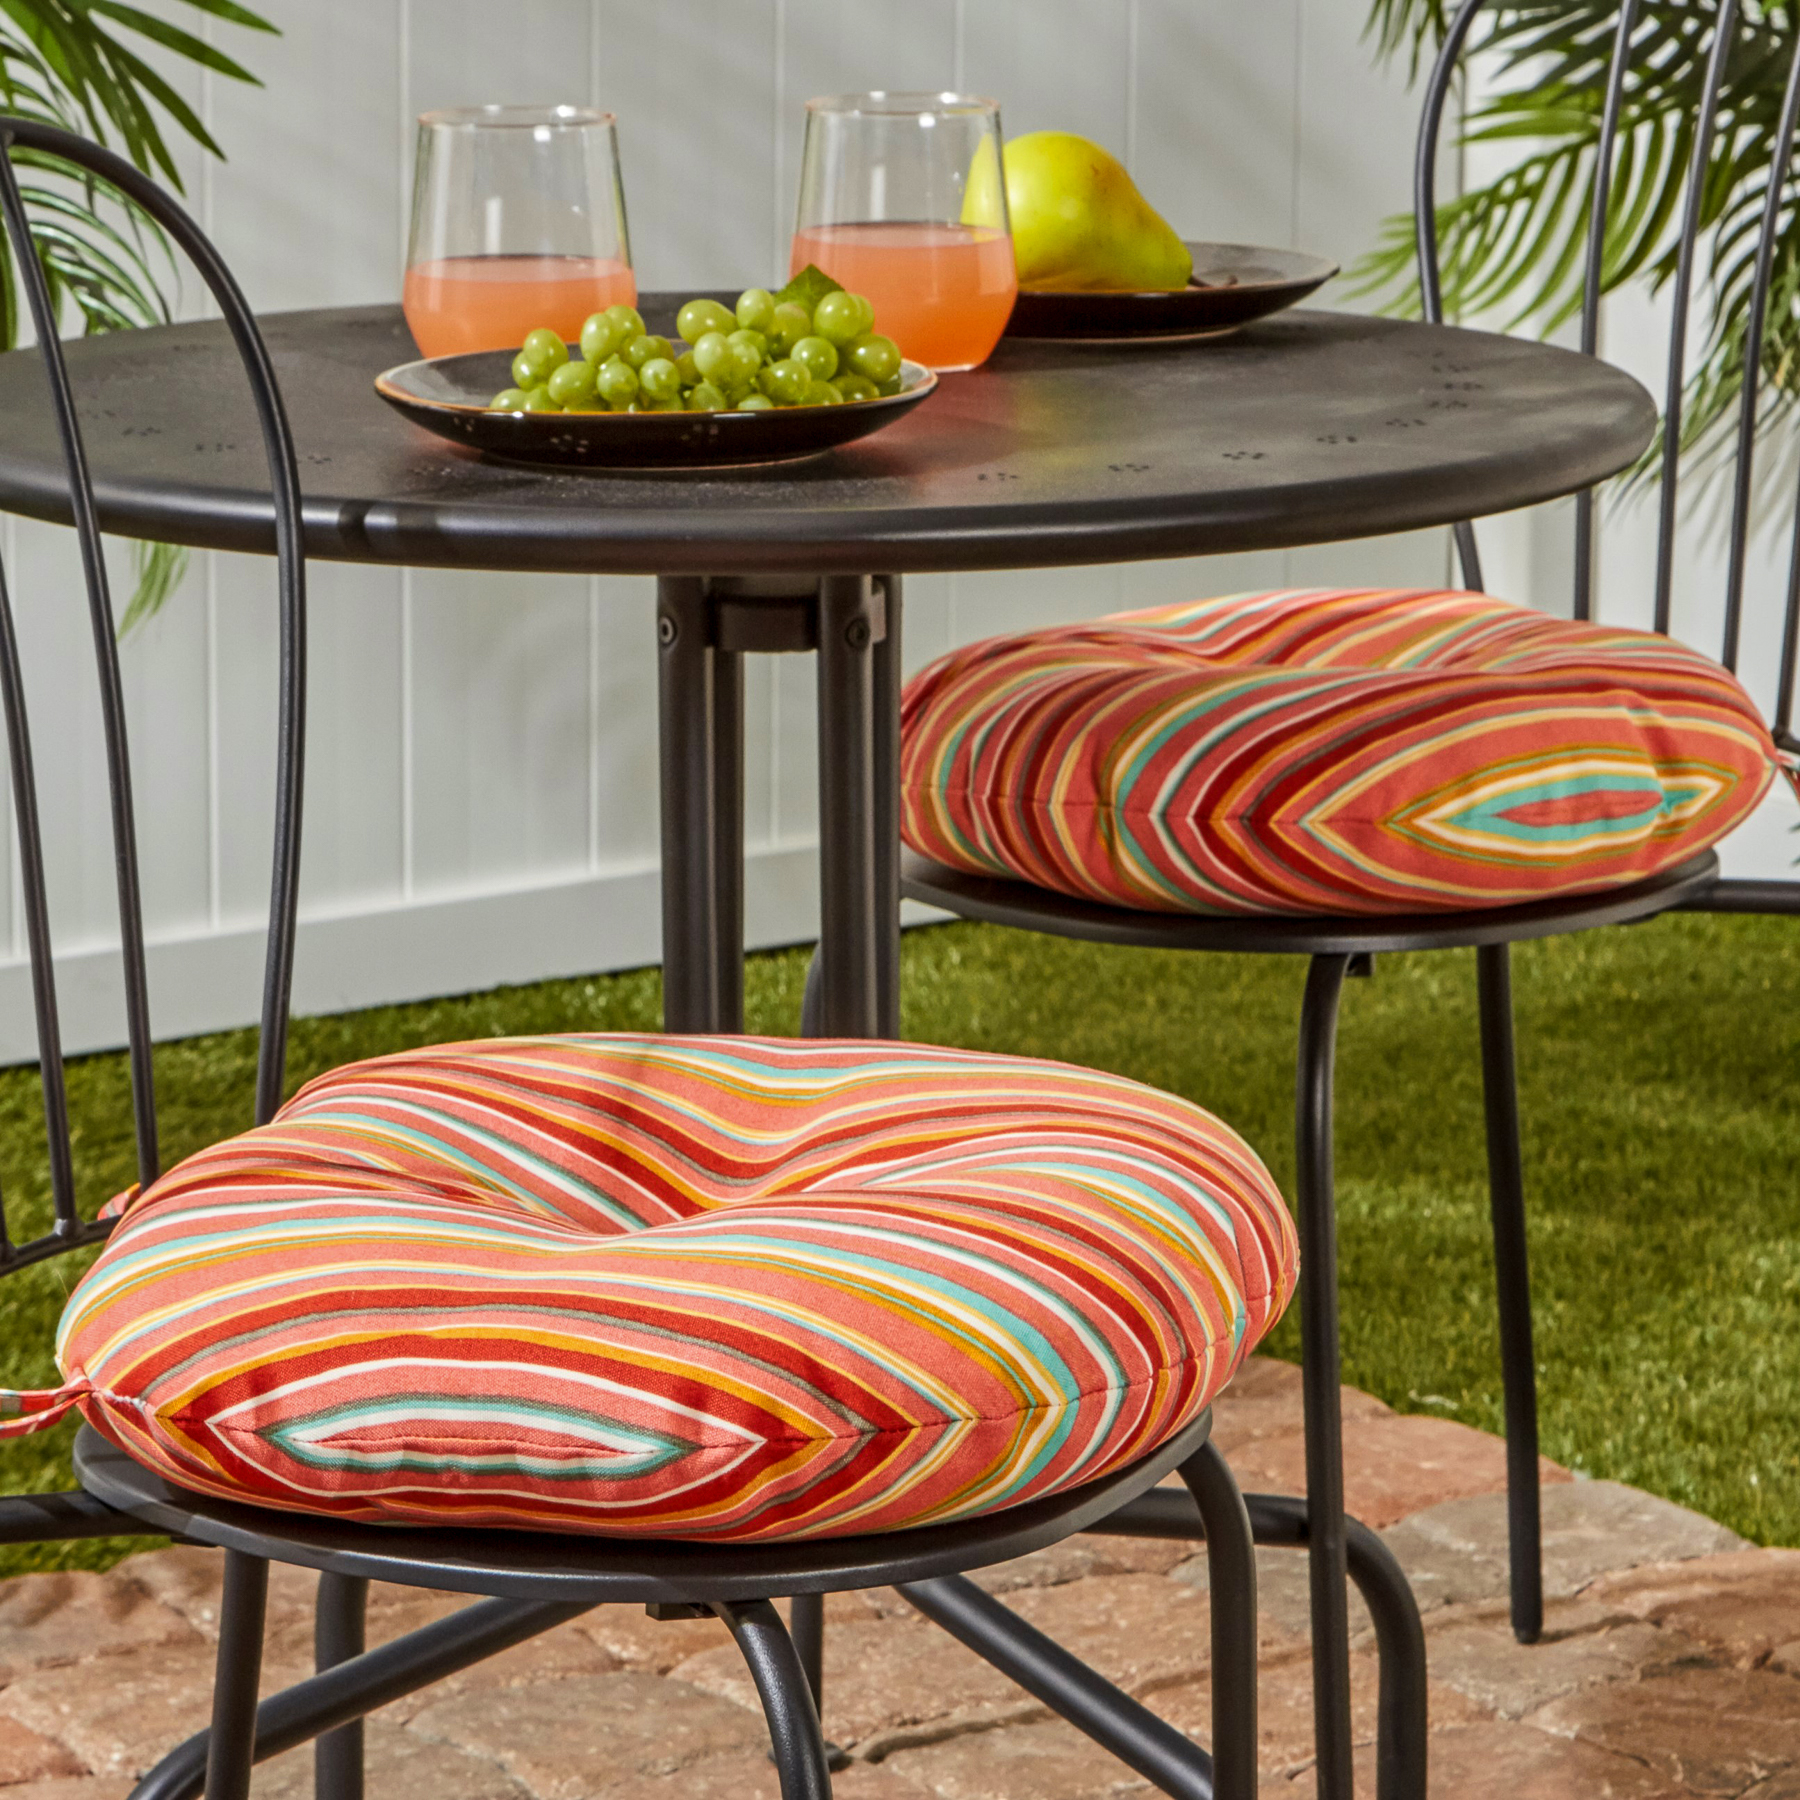 Greendale Home Fashions Watermelon Stripe 15 in. Round Outdoor Reversible Bistro Seat Cushion (Set of 2) - image 4 of 7